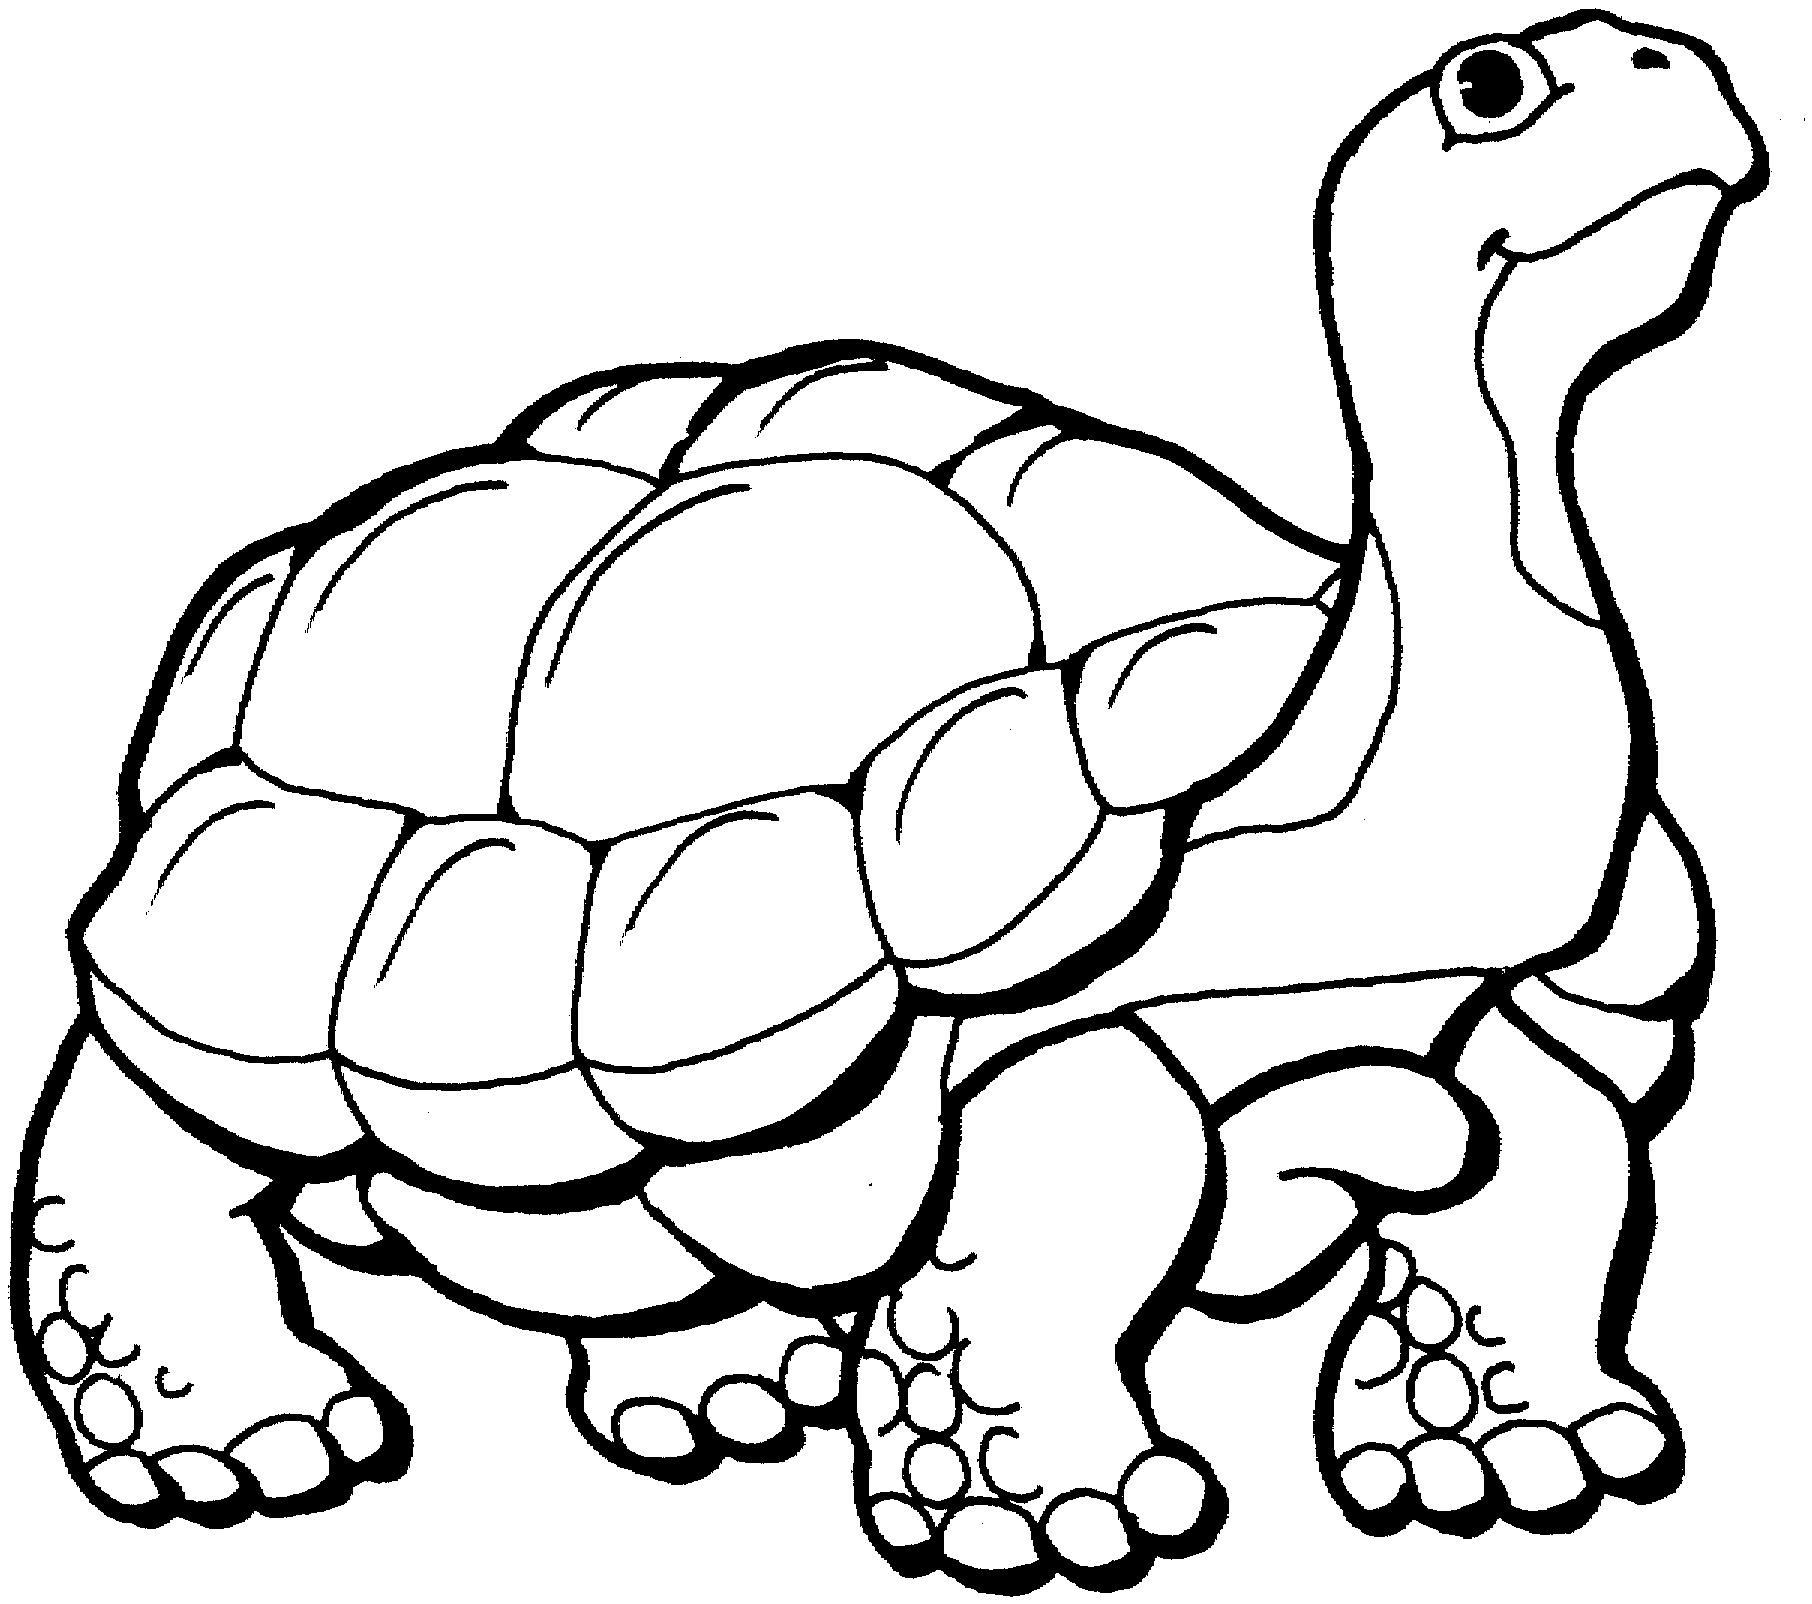 Free Turtle Clipart Black And White, Download Free Clip Art